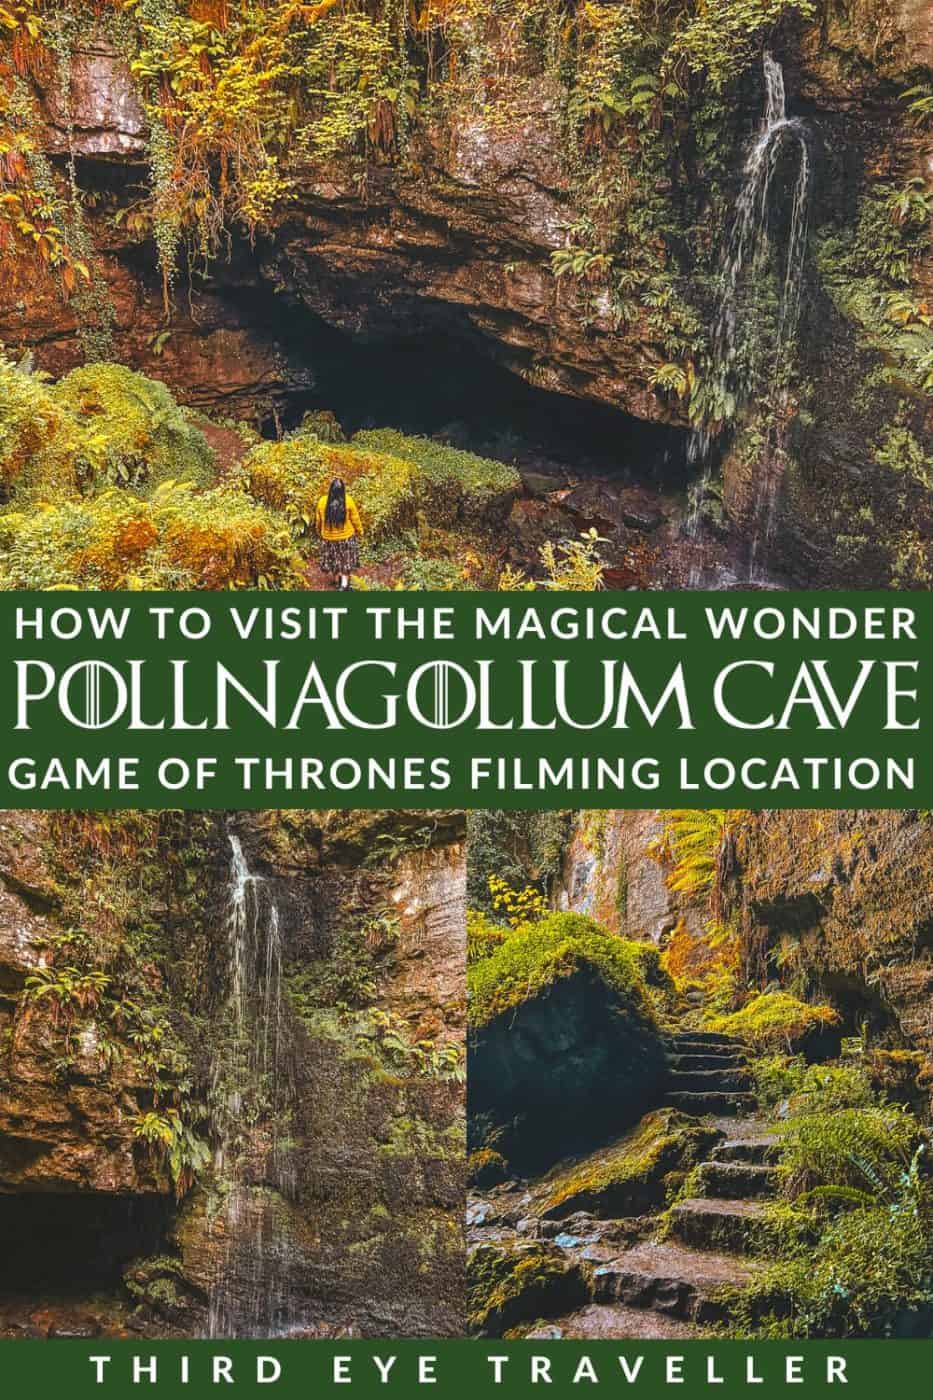 How to visit Pollnagollum Cave Game of Thrones Filming Location